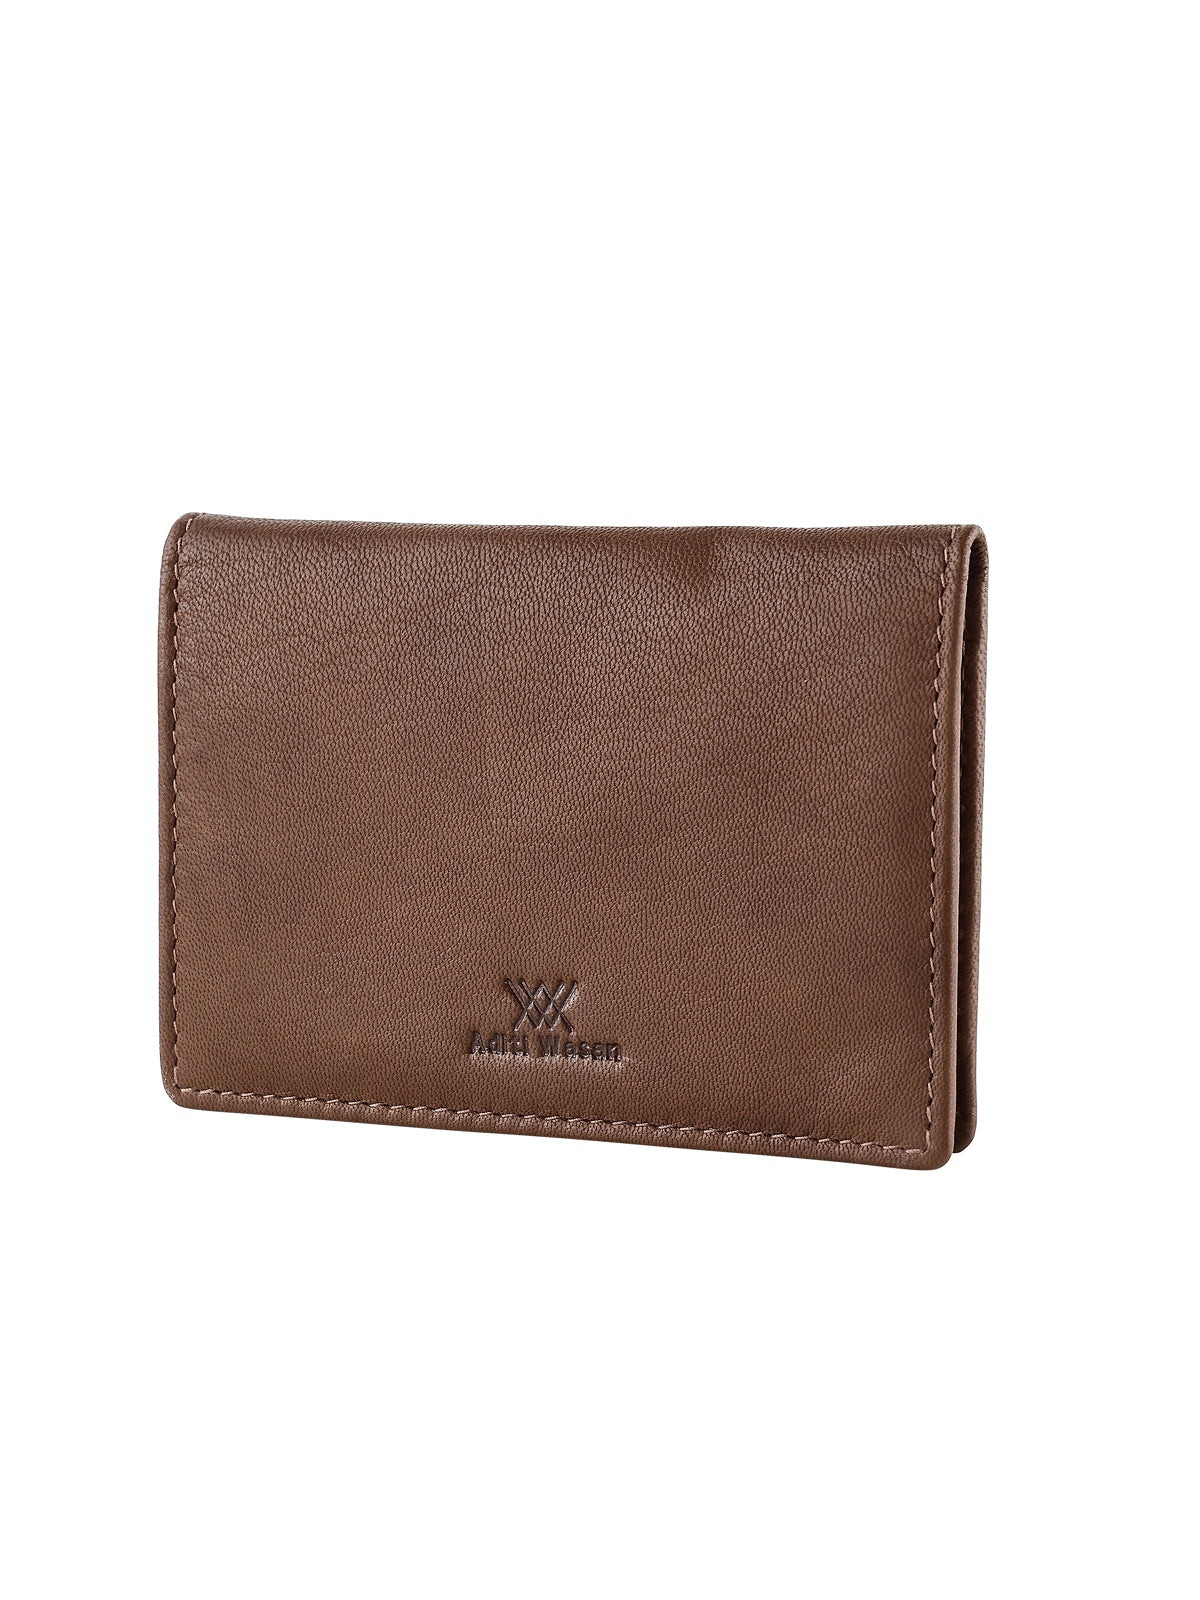 Genuine Leather Cardholder with Flab Button Closure Holds up to 15 Cards - Brown